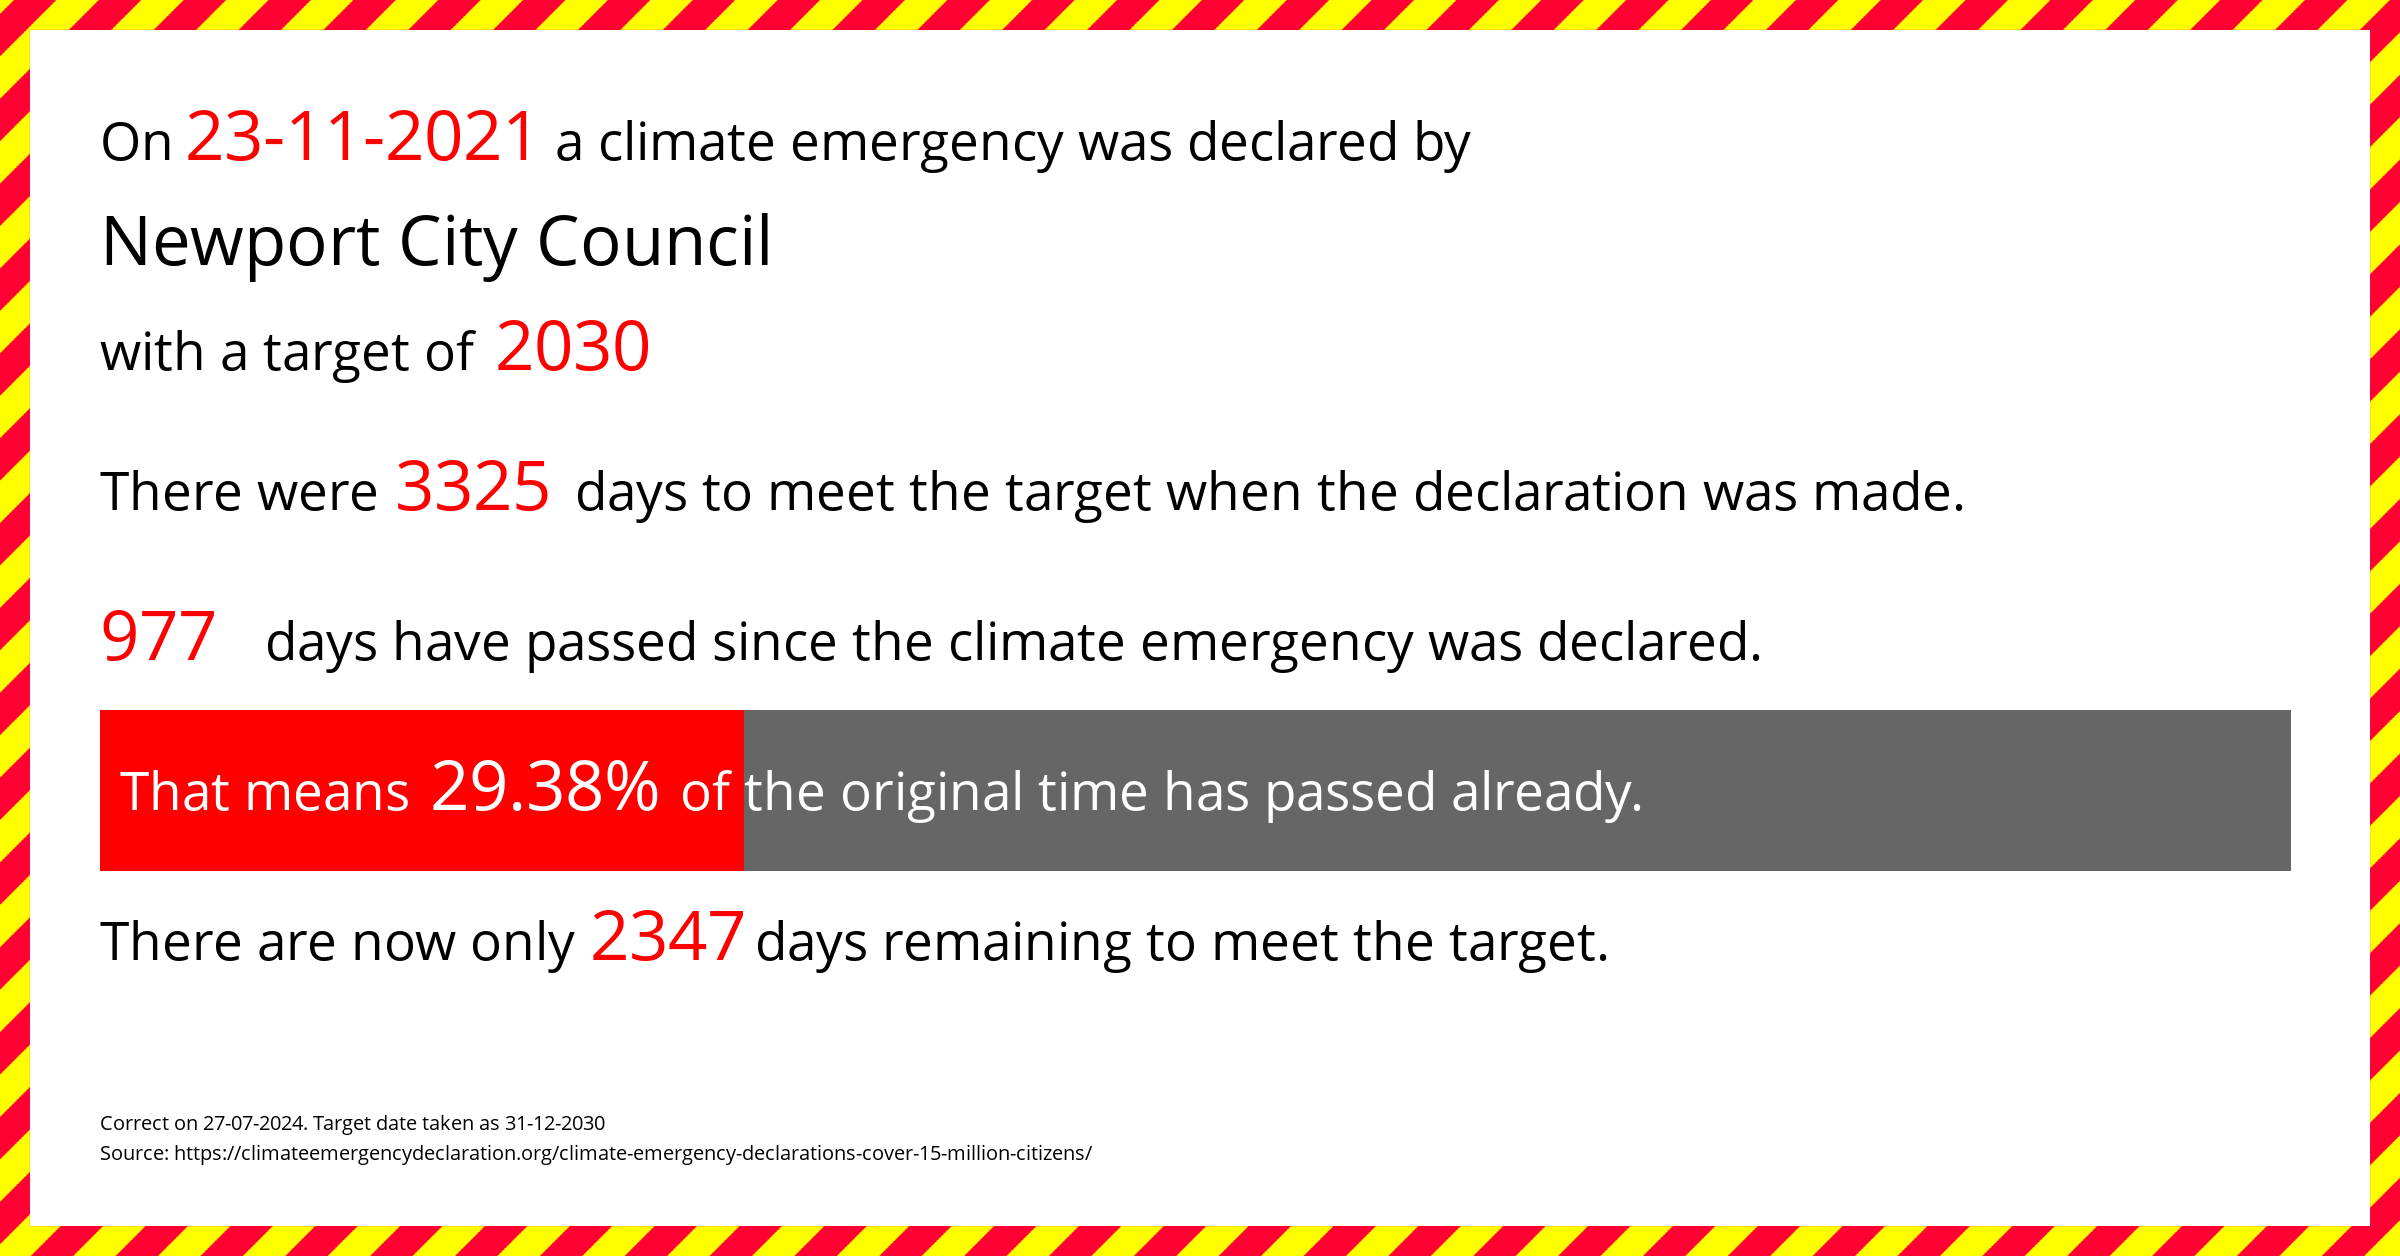 Newport City Council  declared a Climate emergency on Tuesday 23rd November 2021, with a target of 2030.